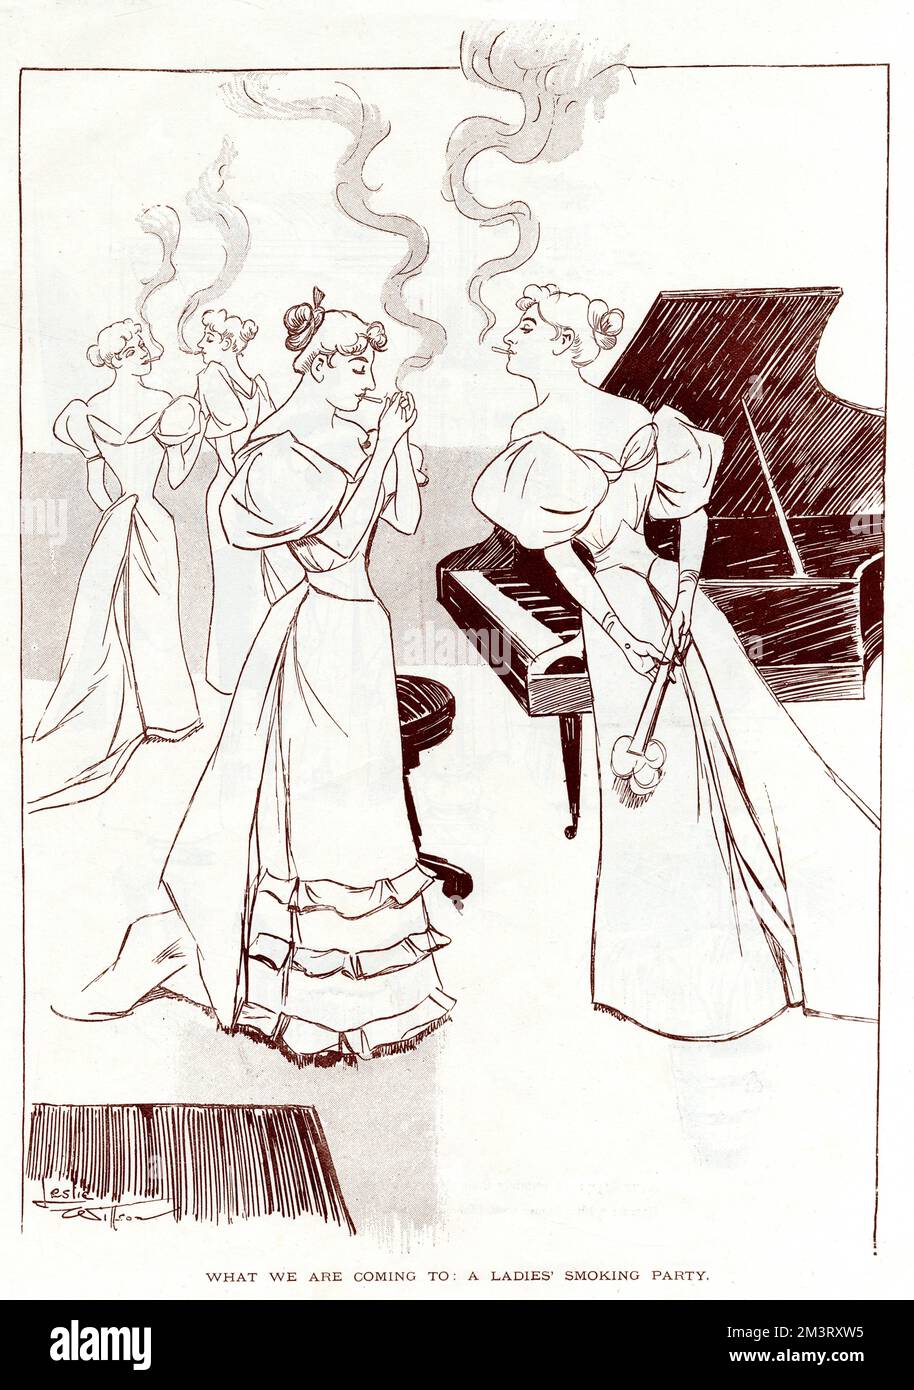 Illustration of an all-female smoking party, captioned 'what we are coming to: a ladies' smoking party', in reference to the changing social standards for women in Britain.      Date: 1894 Stock Photo